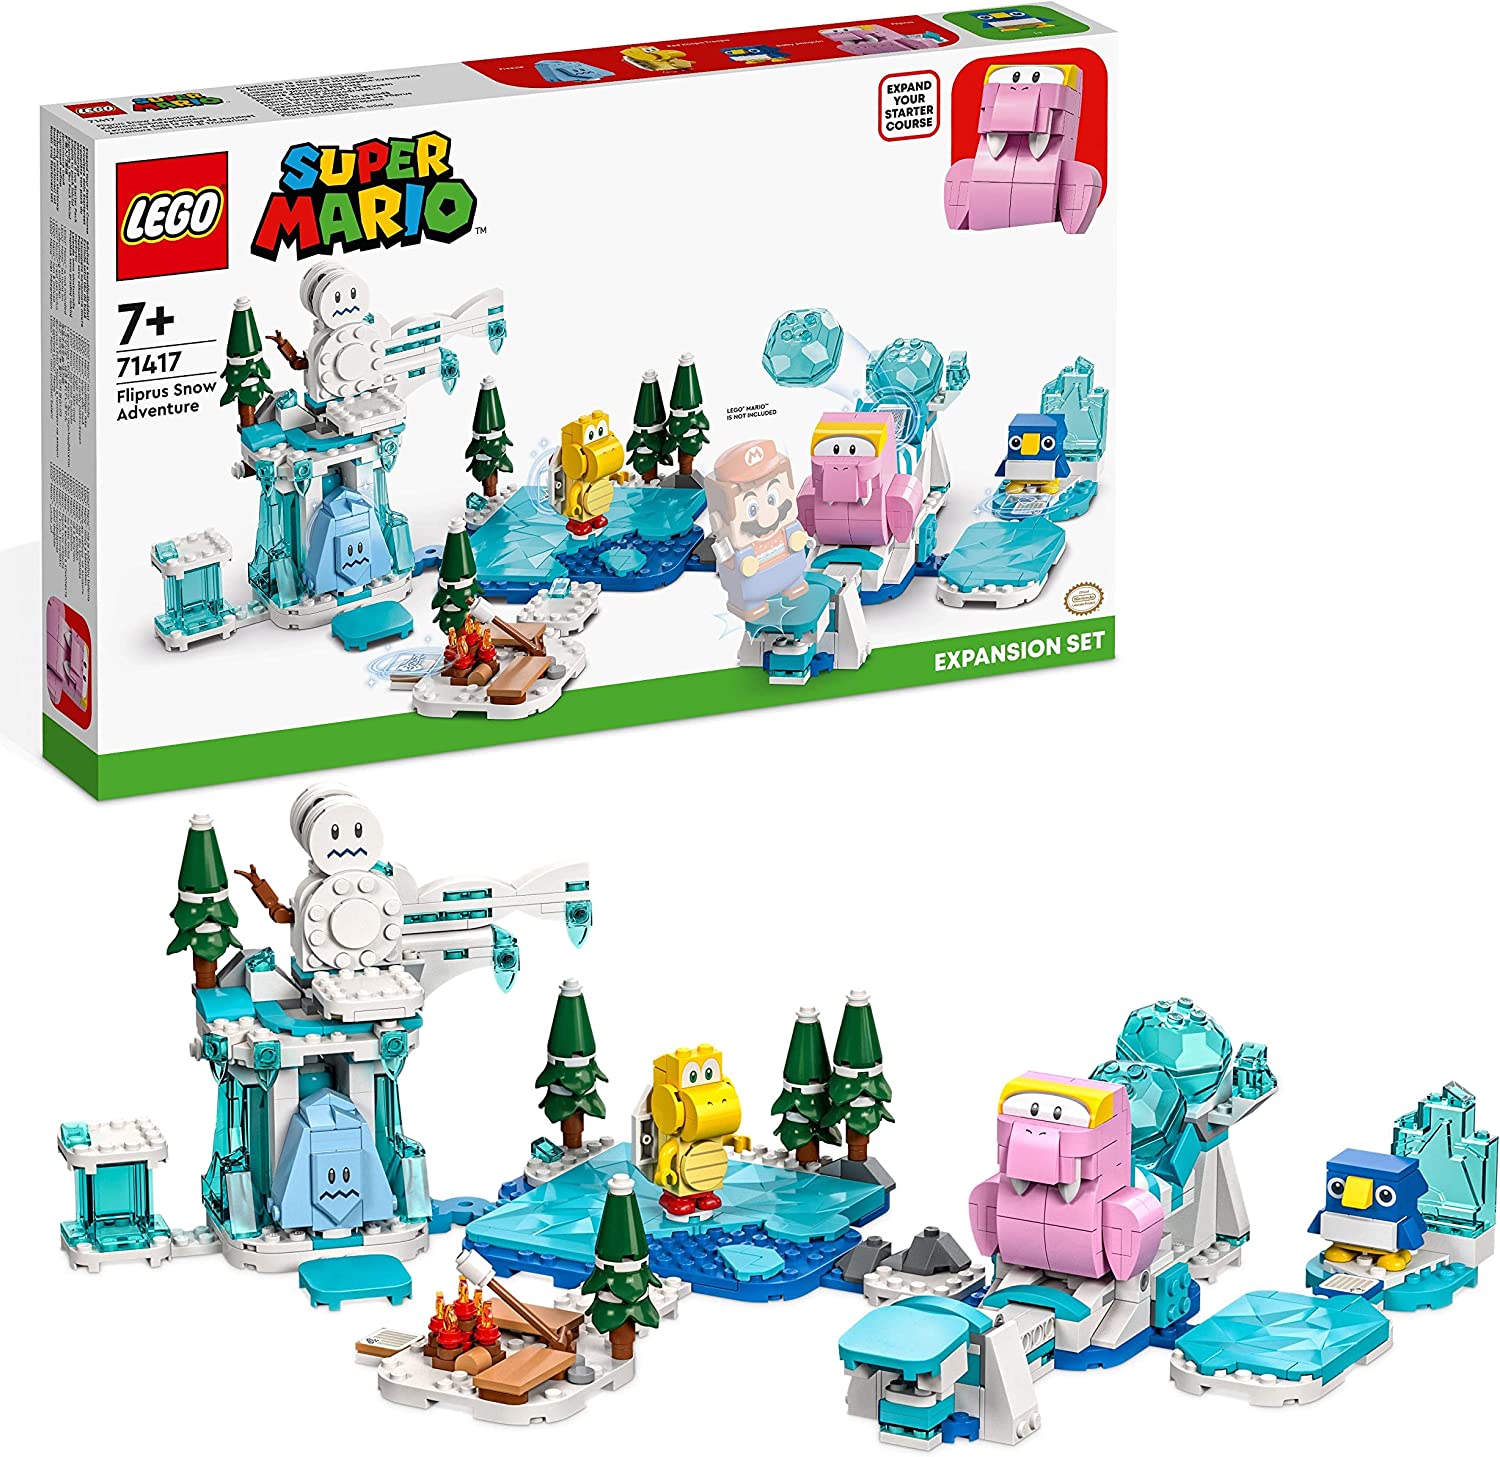 LEGO Super Mario 71417 Kahlross Adventure - Expansion Set with 4 Figures to Combine with Starter Set, Toy for Kids